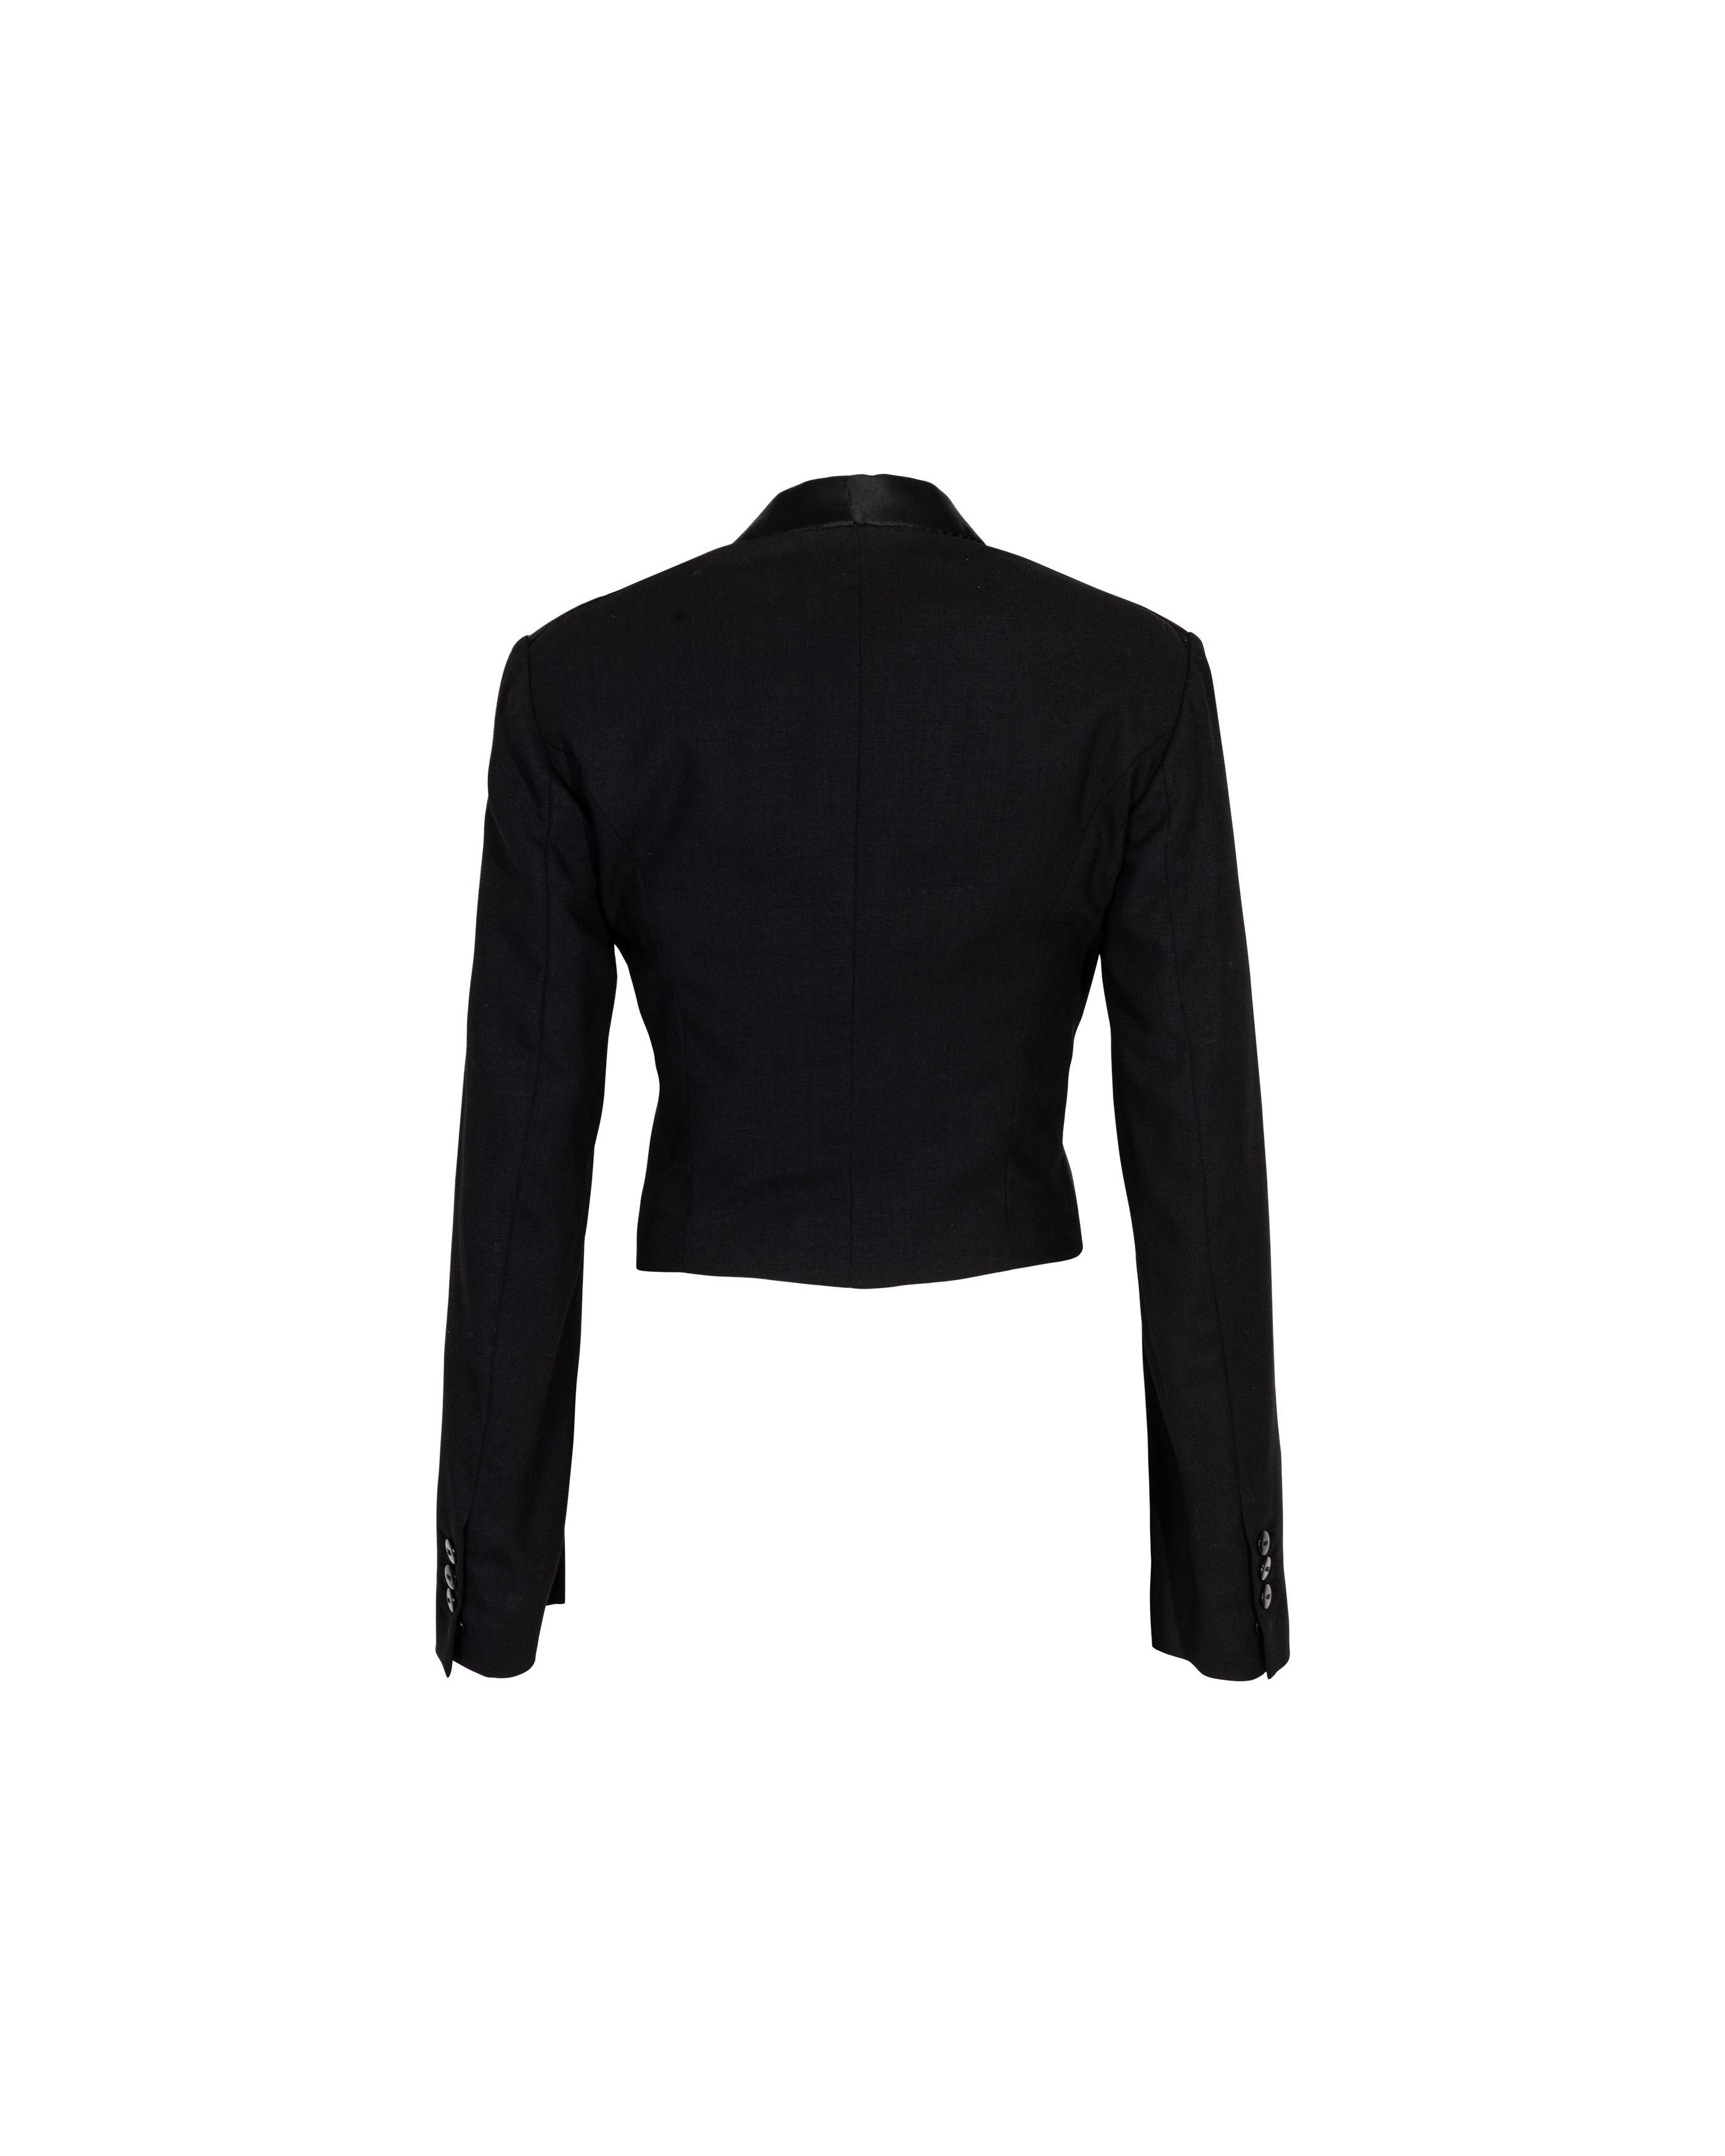 S/S 2002 Maison Martin Margiela Black Cropped Wool Tuxedo Jacket In Good Condition For Sale In North Hollywood, CA